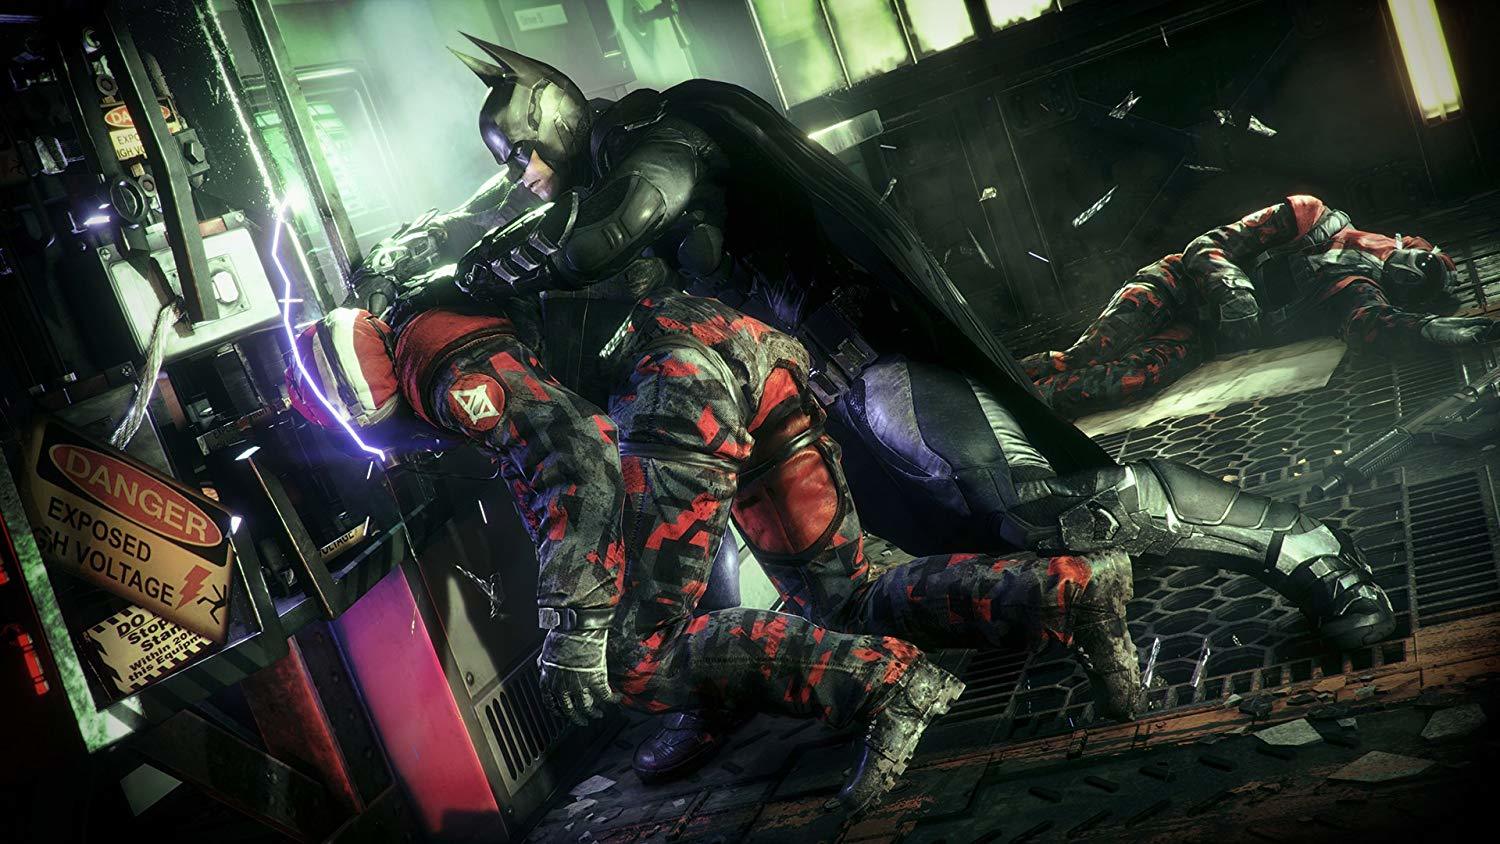 Batman: Arkham Origins listed for PS4/Xbox One by a New Zealand retailer